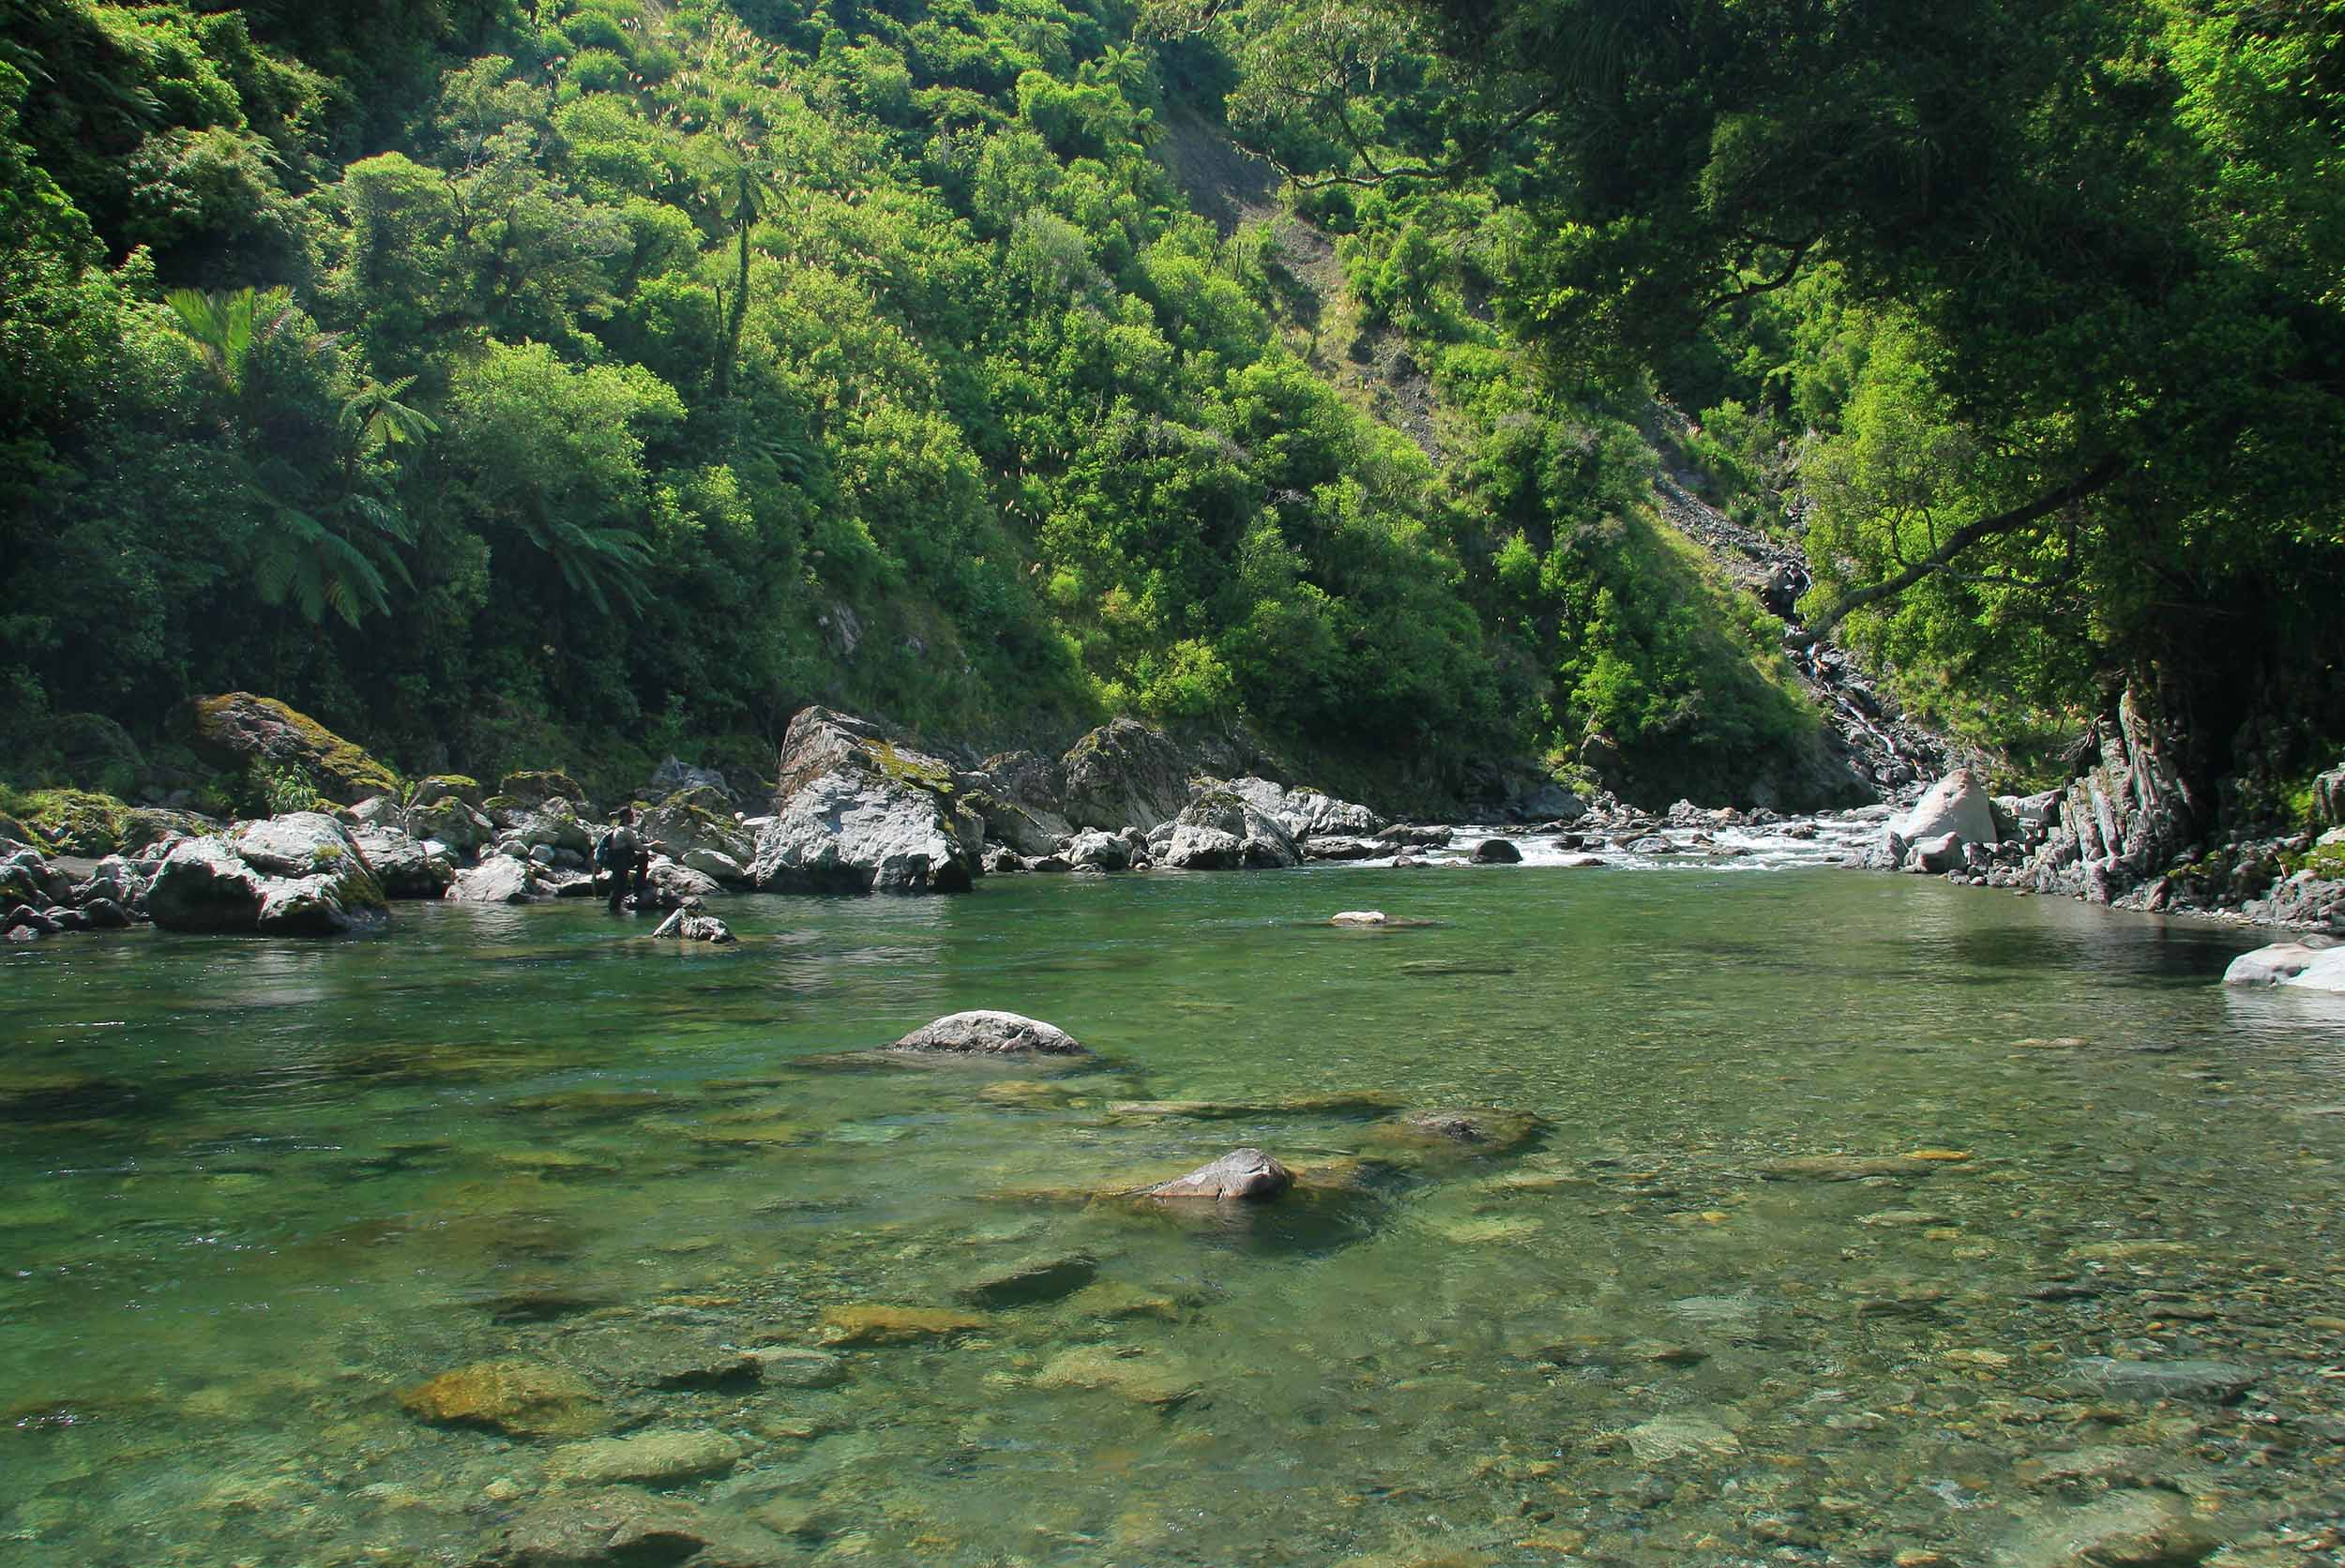 shallow pool in a wide backcountry river, surrounded by rocks, trees and bush clad valley walls, New Zealand